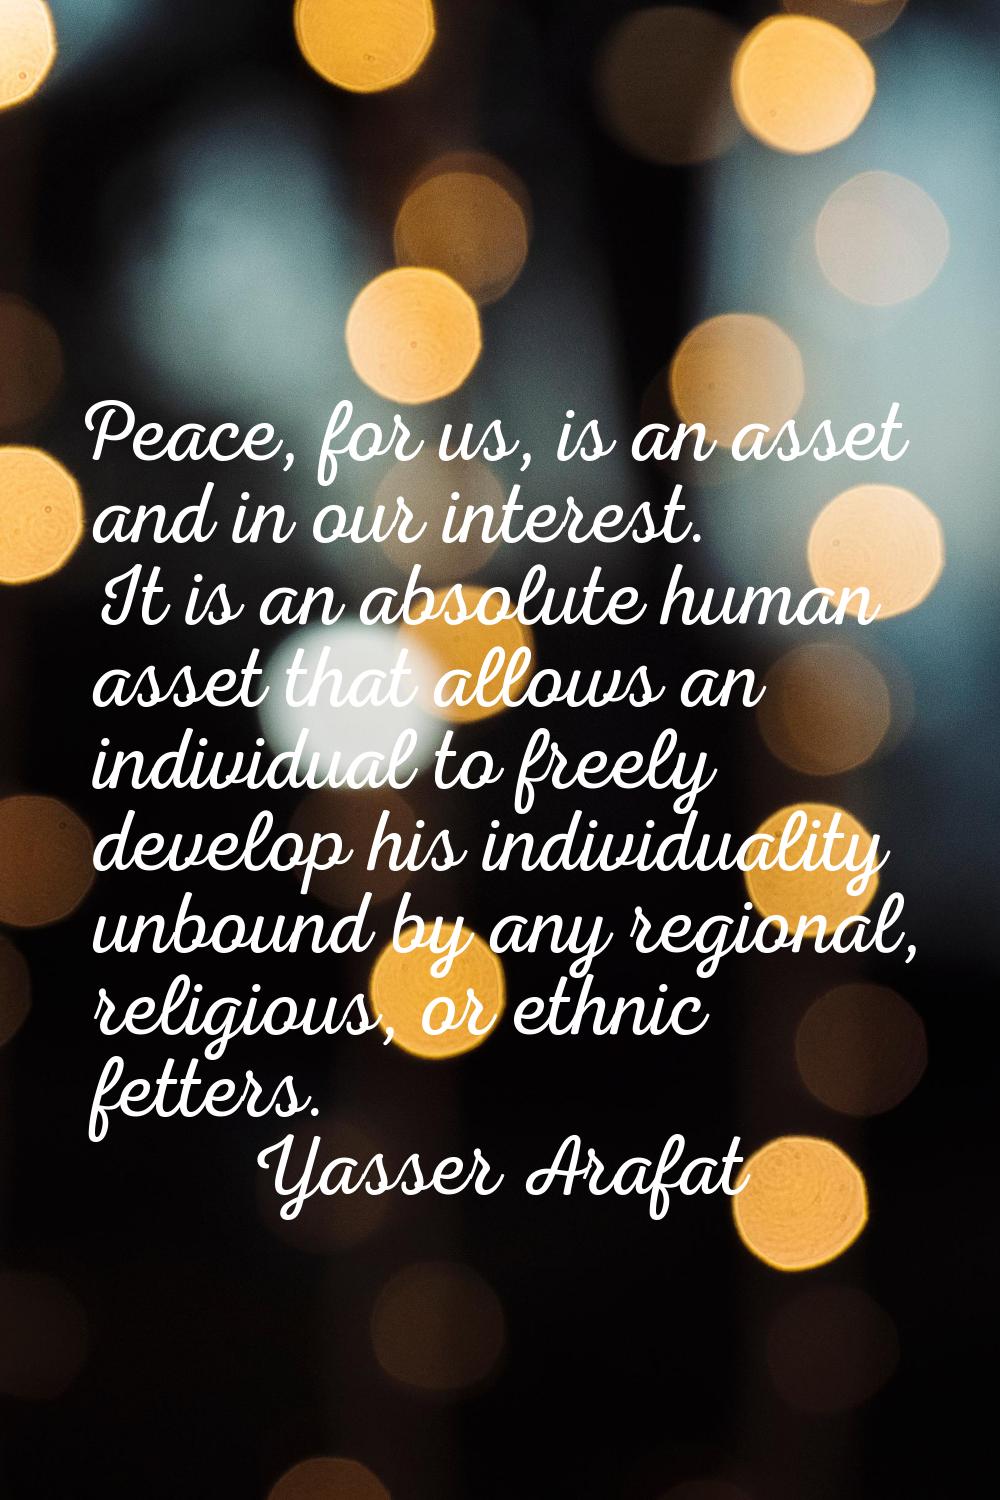 Peace, for us, is an asset and in our interest. It is an absolute human asset that allows an indivi